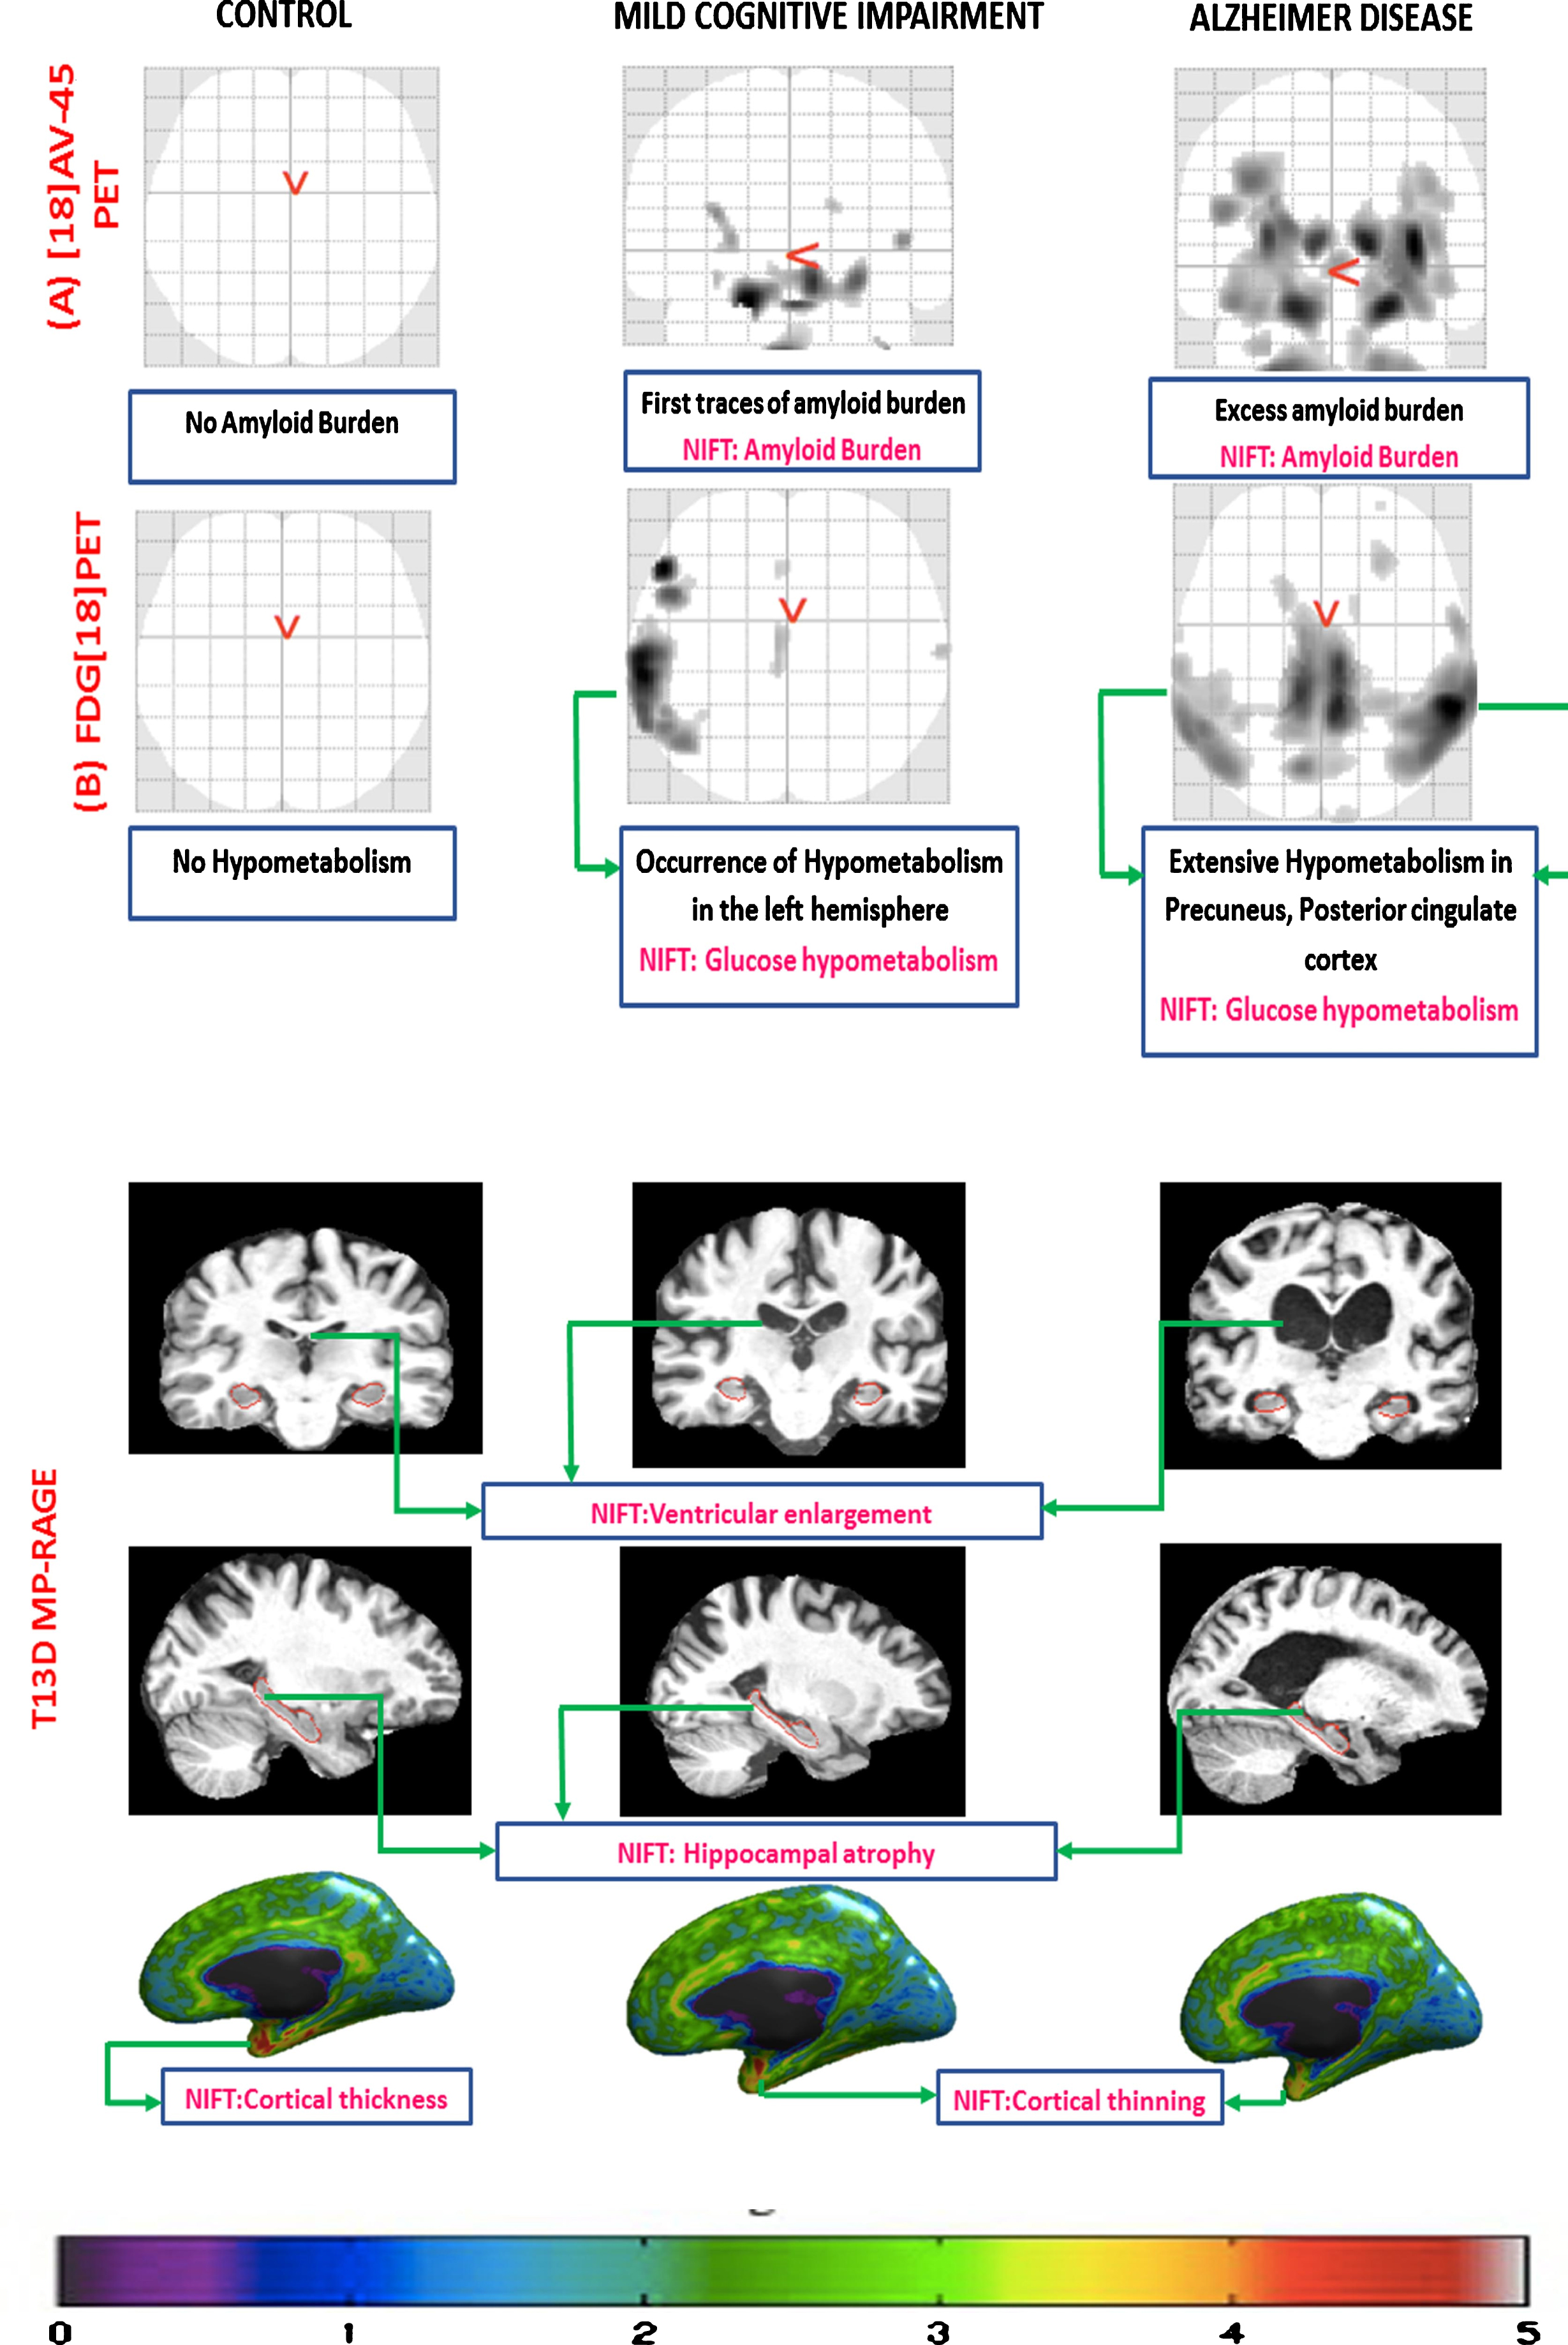 Manual annotation of brain image scans using NIFT. This figure represents different biomarkers captured using three different imaging techniques in control, mild cognitive impairment (MCI), and AD respectively. A) [18] AV-45 PET scan: this figure captures the increased amount of amyloid burden (p-value threshold 0.001; voxel extend 10; smoothing kernel [8-8-8]) during the disease progression across CN, MCI, and AD, respectively. B) FDG [18] PET: this figure captures no hypometabolism in control, increased hypometabolic pattern in case of MCI, and extensive hypometabolic topography in the temporo-parietal regions, precuneus, and posterior cingulate cortex (p-value threshold 0.001; voxel extend 10; smoothing kernel [8-8-8]). C) T13D MP-RAGE: the first row of the figure demonstrates the progressive ventricular enlargement among control, MCI, and AD respectively. The second row represents progressive hippocampal atrophy across control, MCI, and AD. The third row represents progressive cortical shrinkage in the temporal-parietal lobe, posterior cingulate and precuneus area.